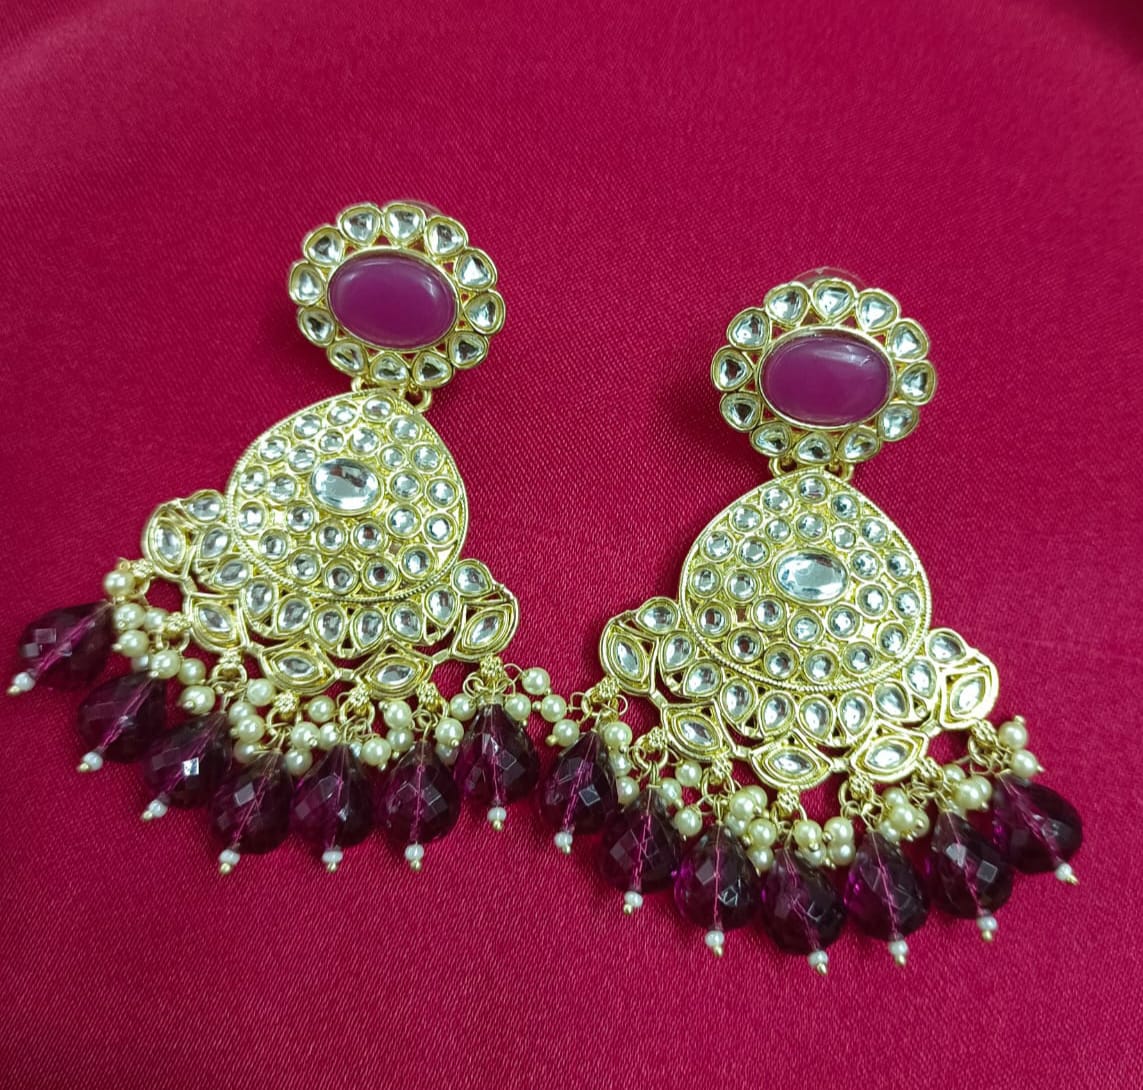 Exquisite Hand Crafted Jhumkas: Embrace the Rich Heritage of Timeless Indian Elegance